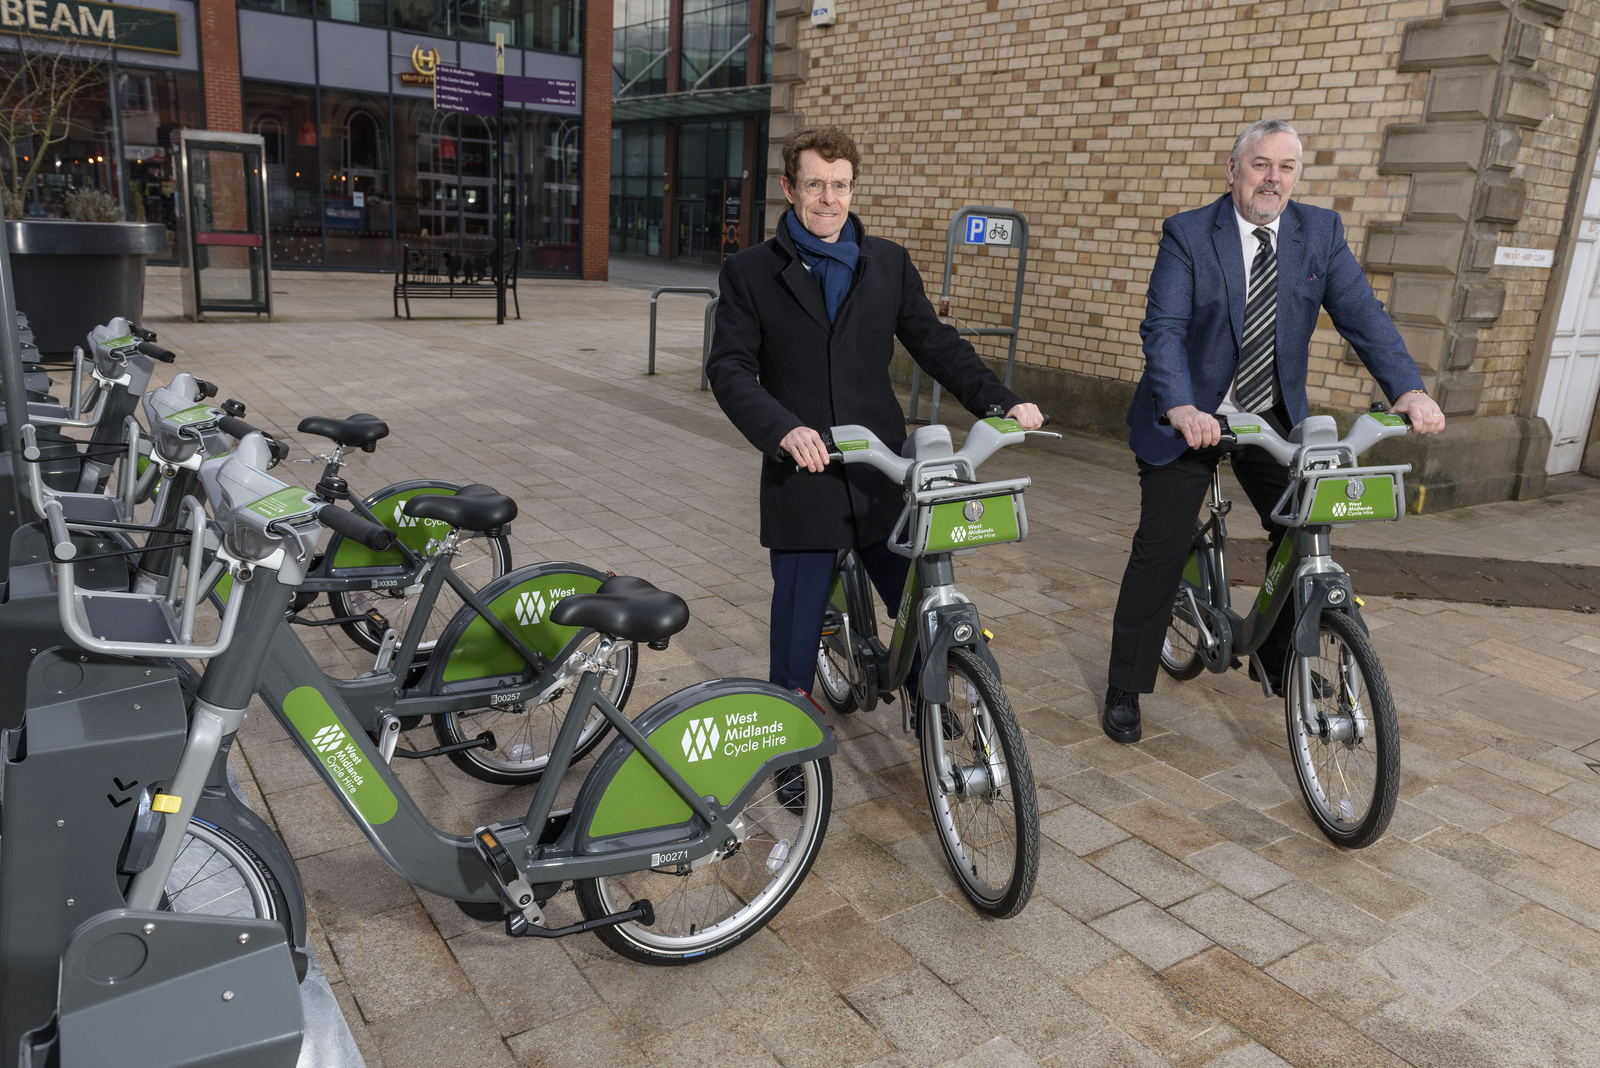 West Midlands Cycle Hire launched in Wolverhampton and Sutton Coldfield